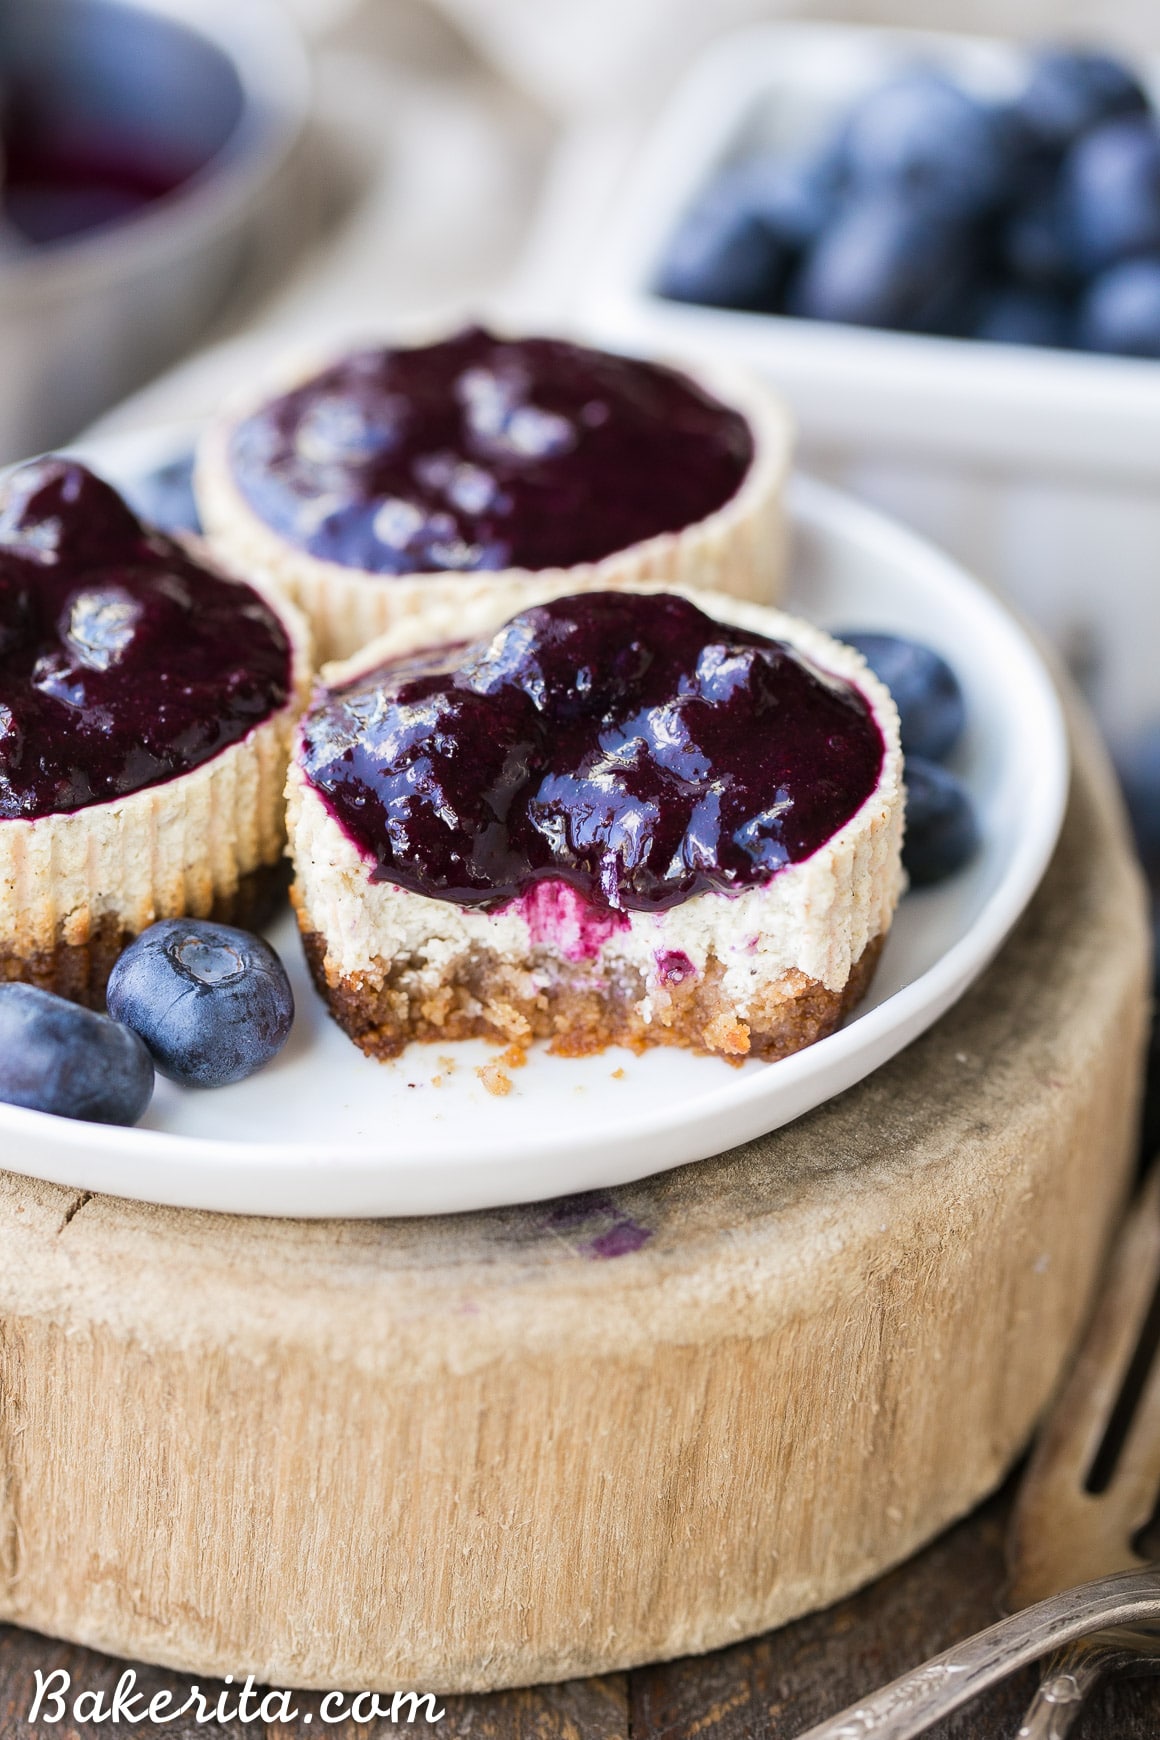 These Vanilla Bean Greek Yogurt Cheesecakes with Blueberry Compote are lightened up, but they're just as creamy and flavorful as traditional full-fat cheesecake. The easy blueberry compote takes this gluten free and refined sugar free dessert over the top!